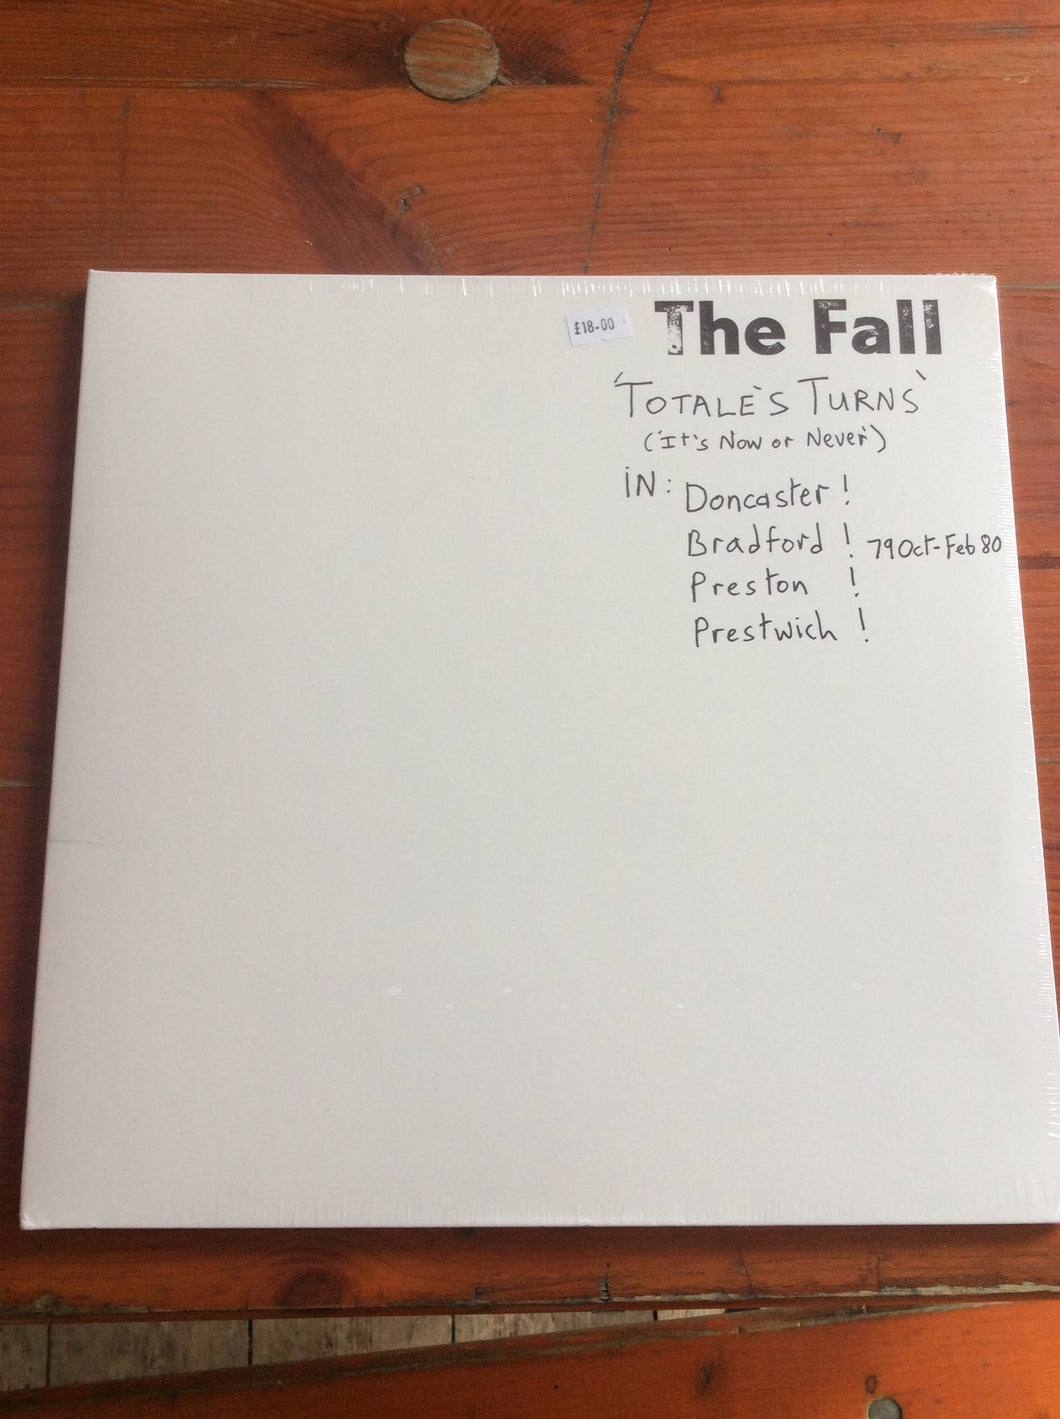 The Fall - Totales Turns